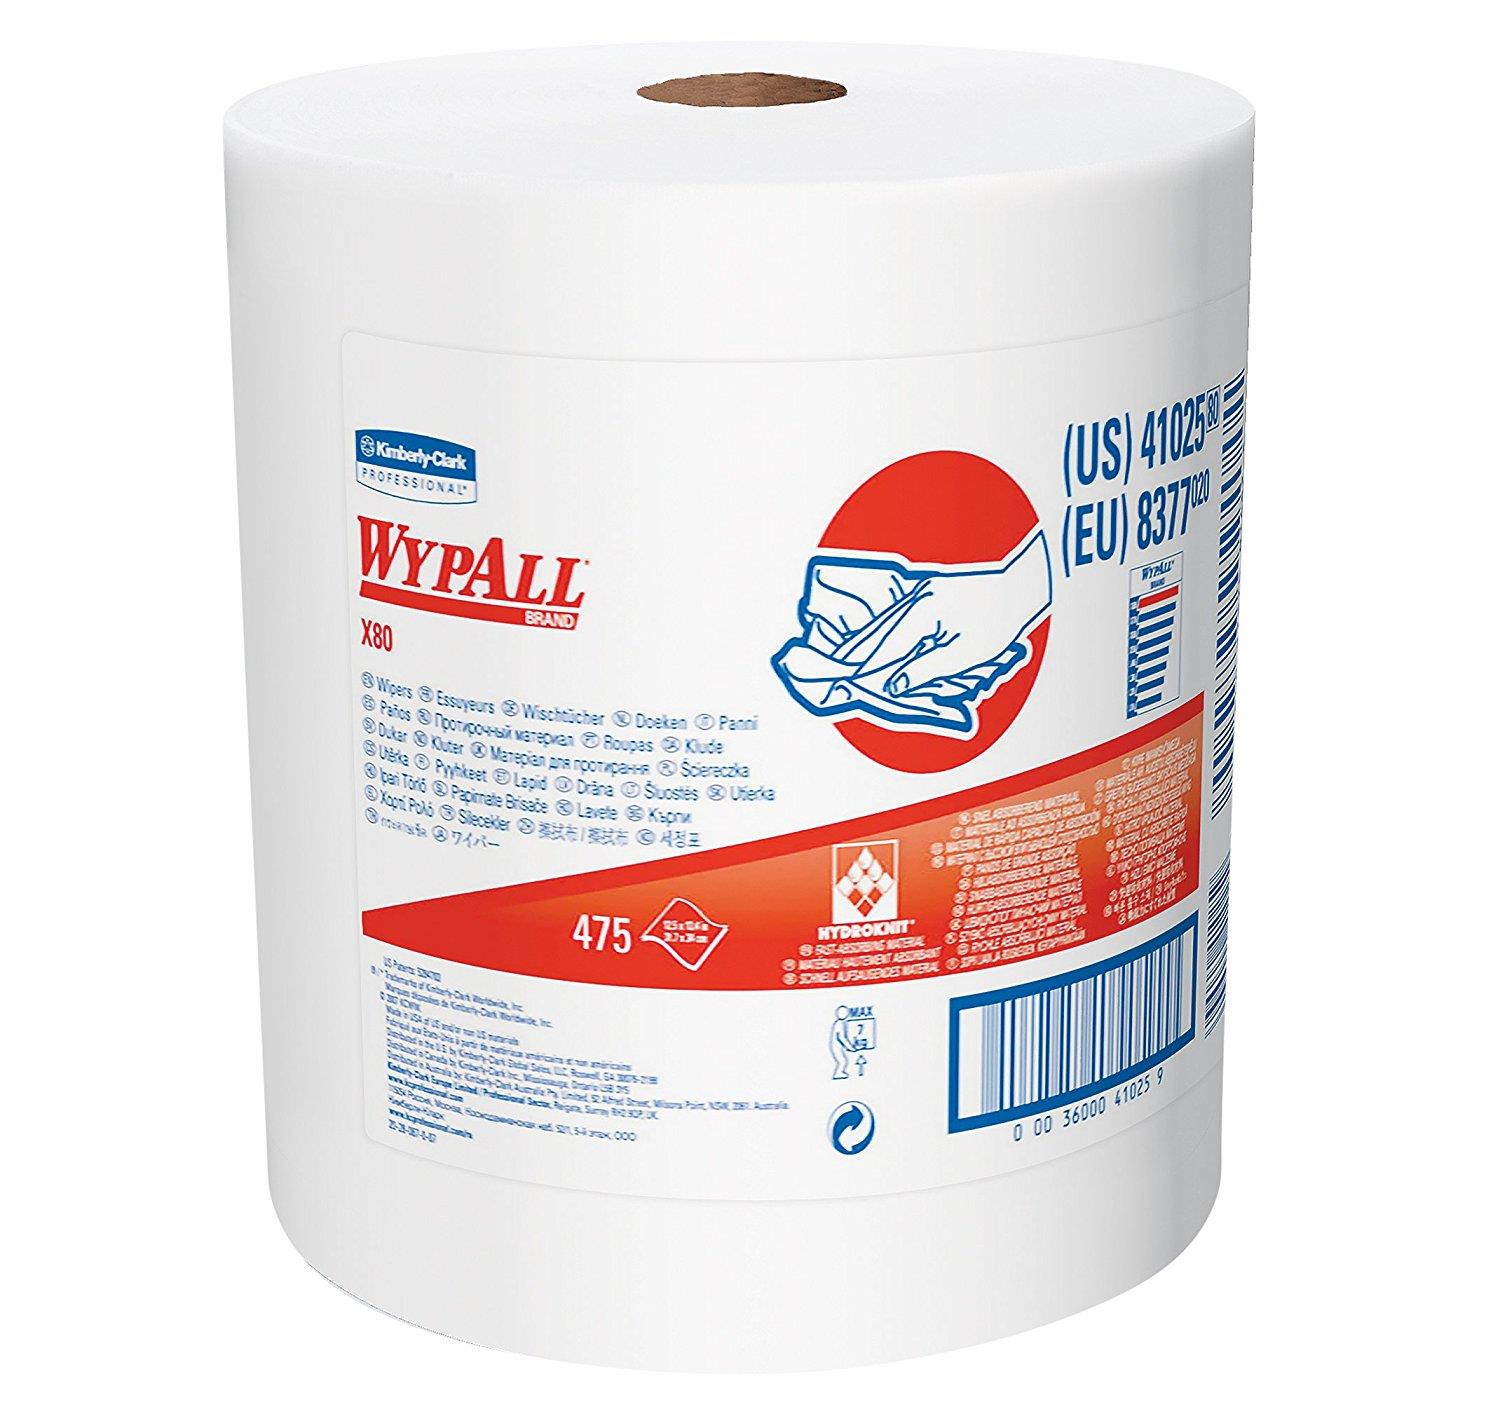 WYPALL X80 JUMBO ROLL WHITE 475 WIPERS - WYPALL X80